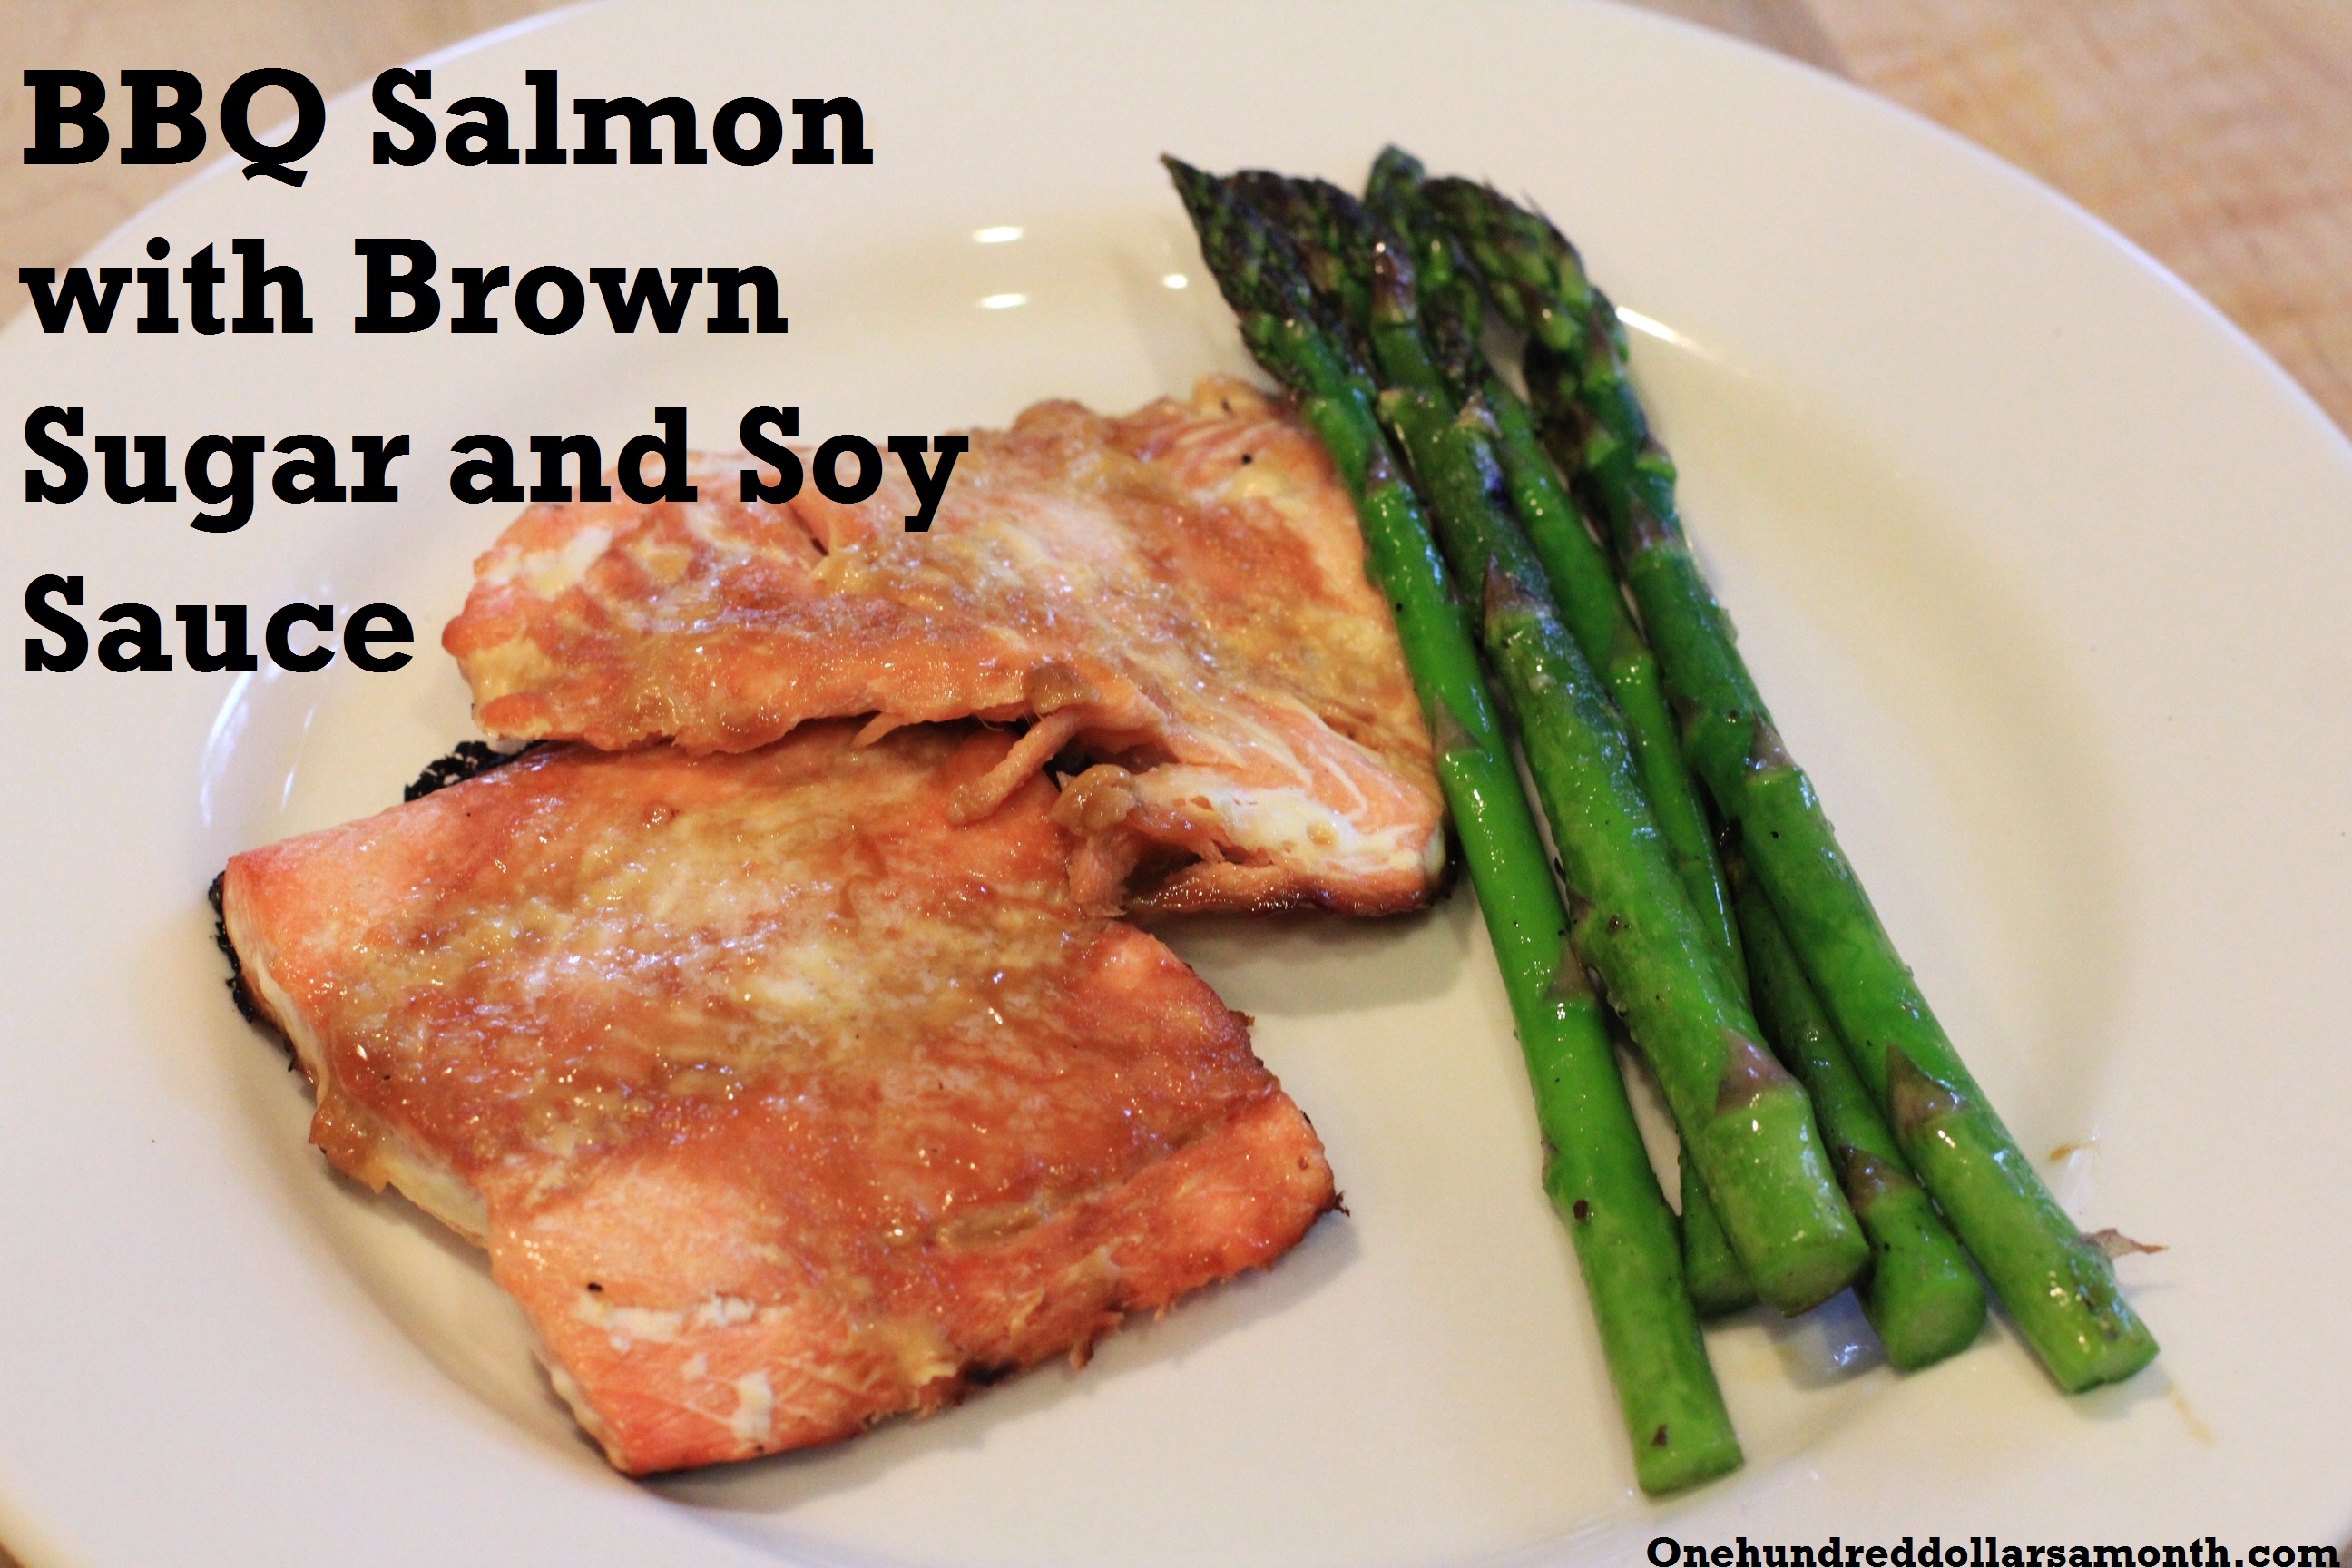 Recipe: BBQ Salmon with Brown Sugar and Soy Sauce